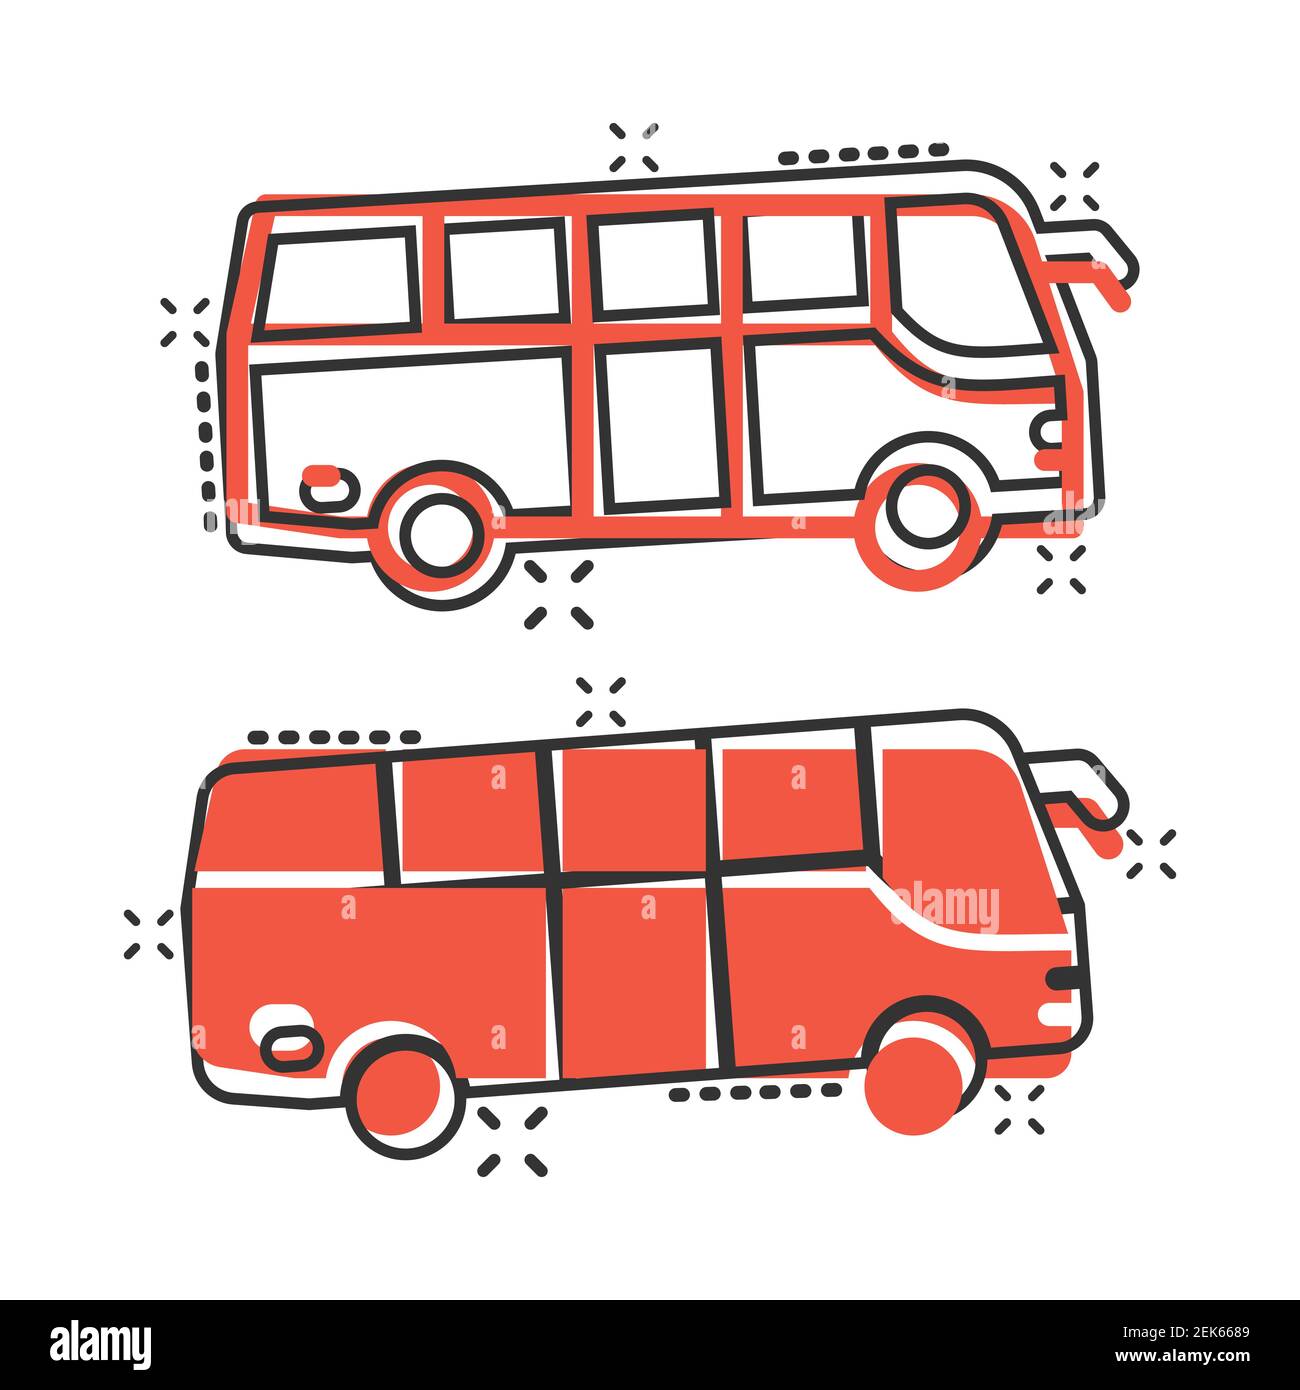 Bus icon in comic style. Coach cartoon vector illustration on white isolated background. Autobus vehicle splash effect business concept. Stock Vector